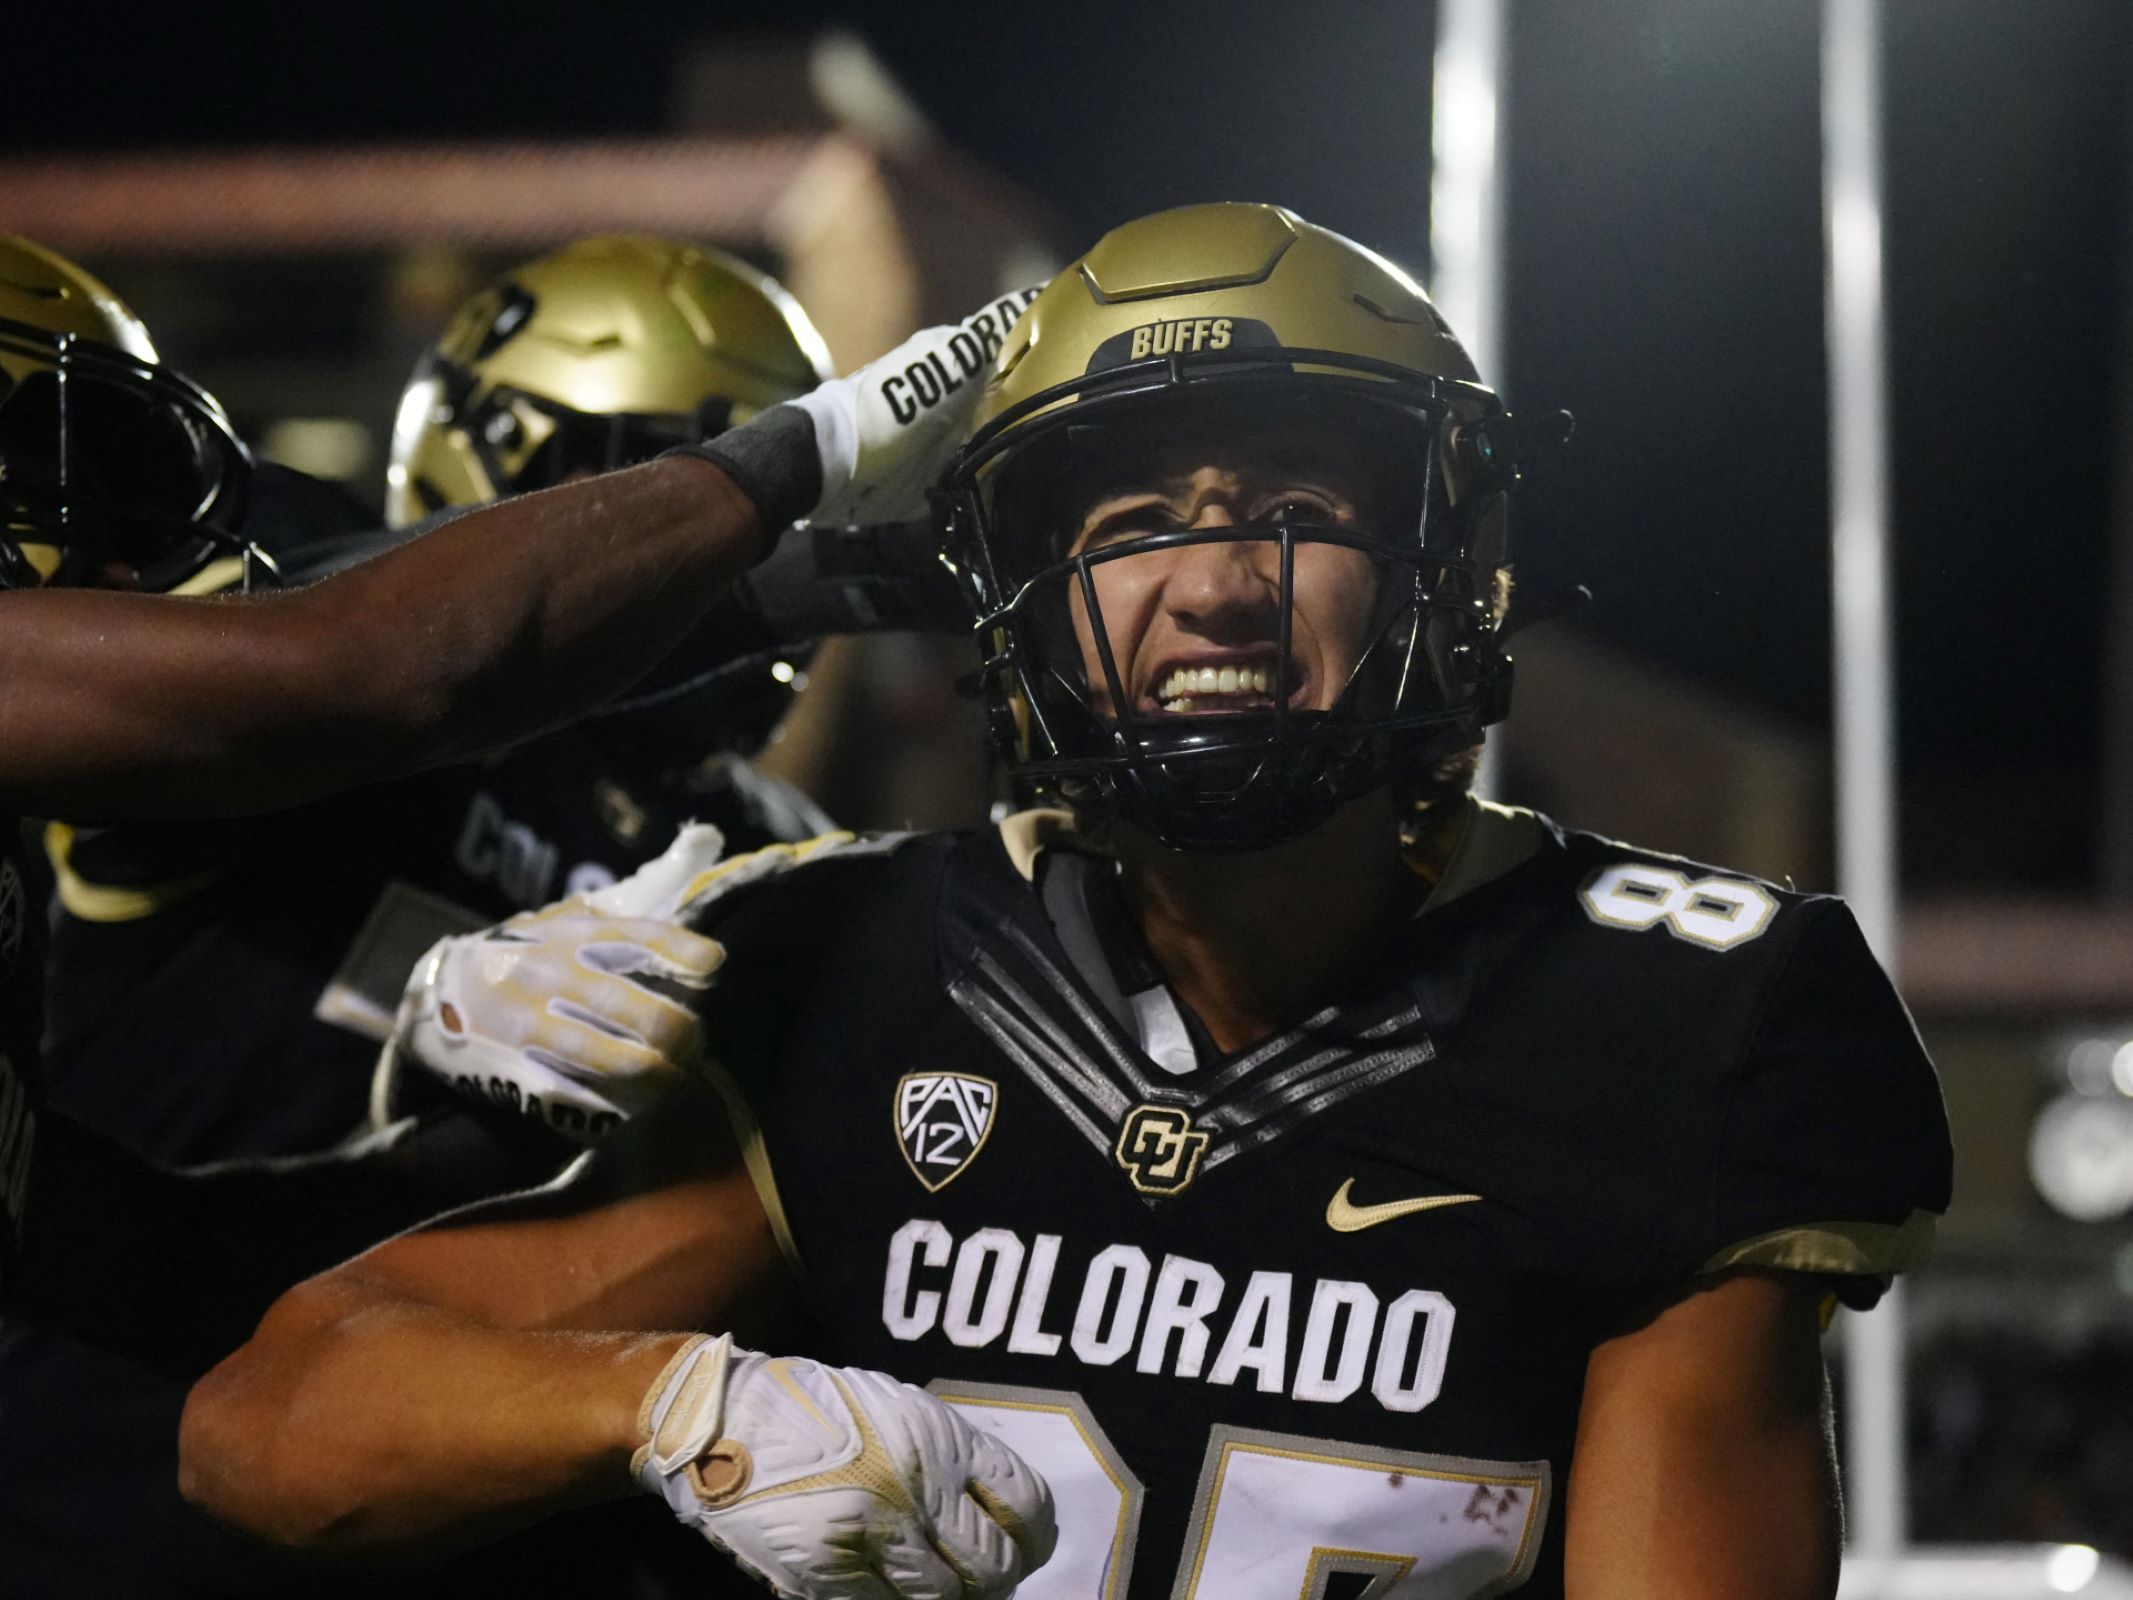 Colorado’s Epic Win Over CSU Makes History As Most-Watched Late-Night CFB Game On ESPN